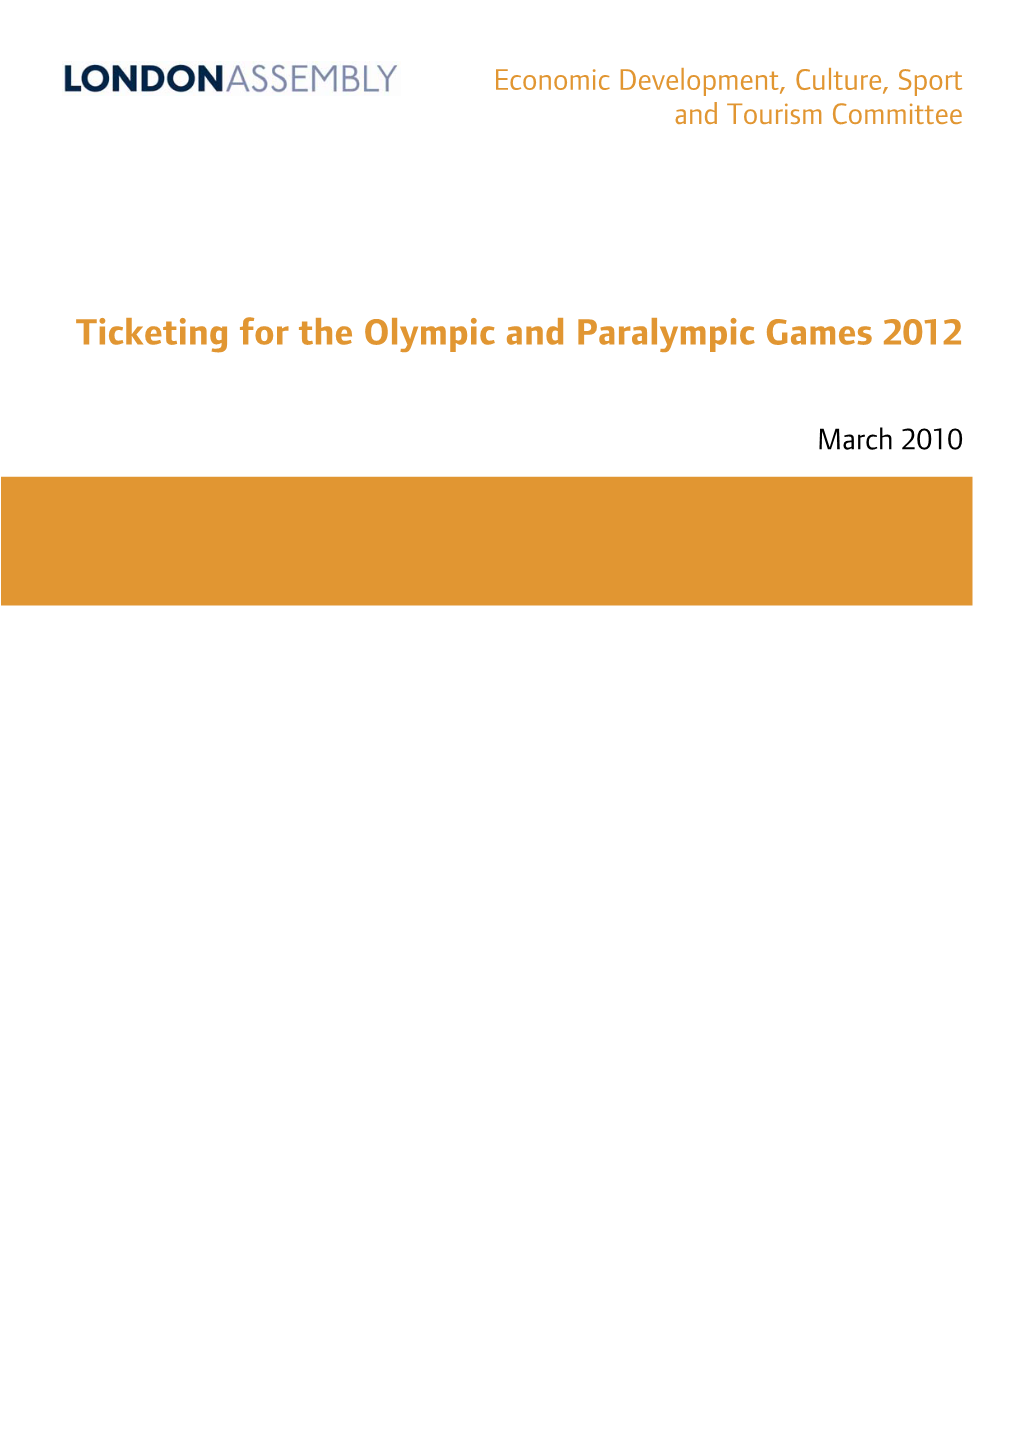 Ticketing for the Olympic and Paralympic Games 2012